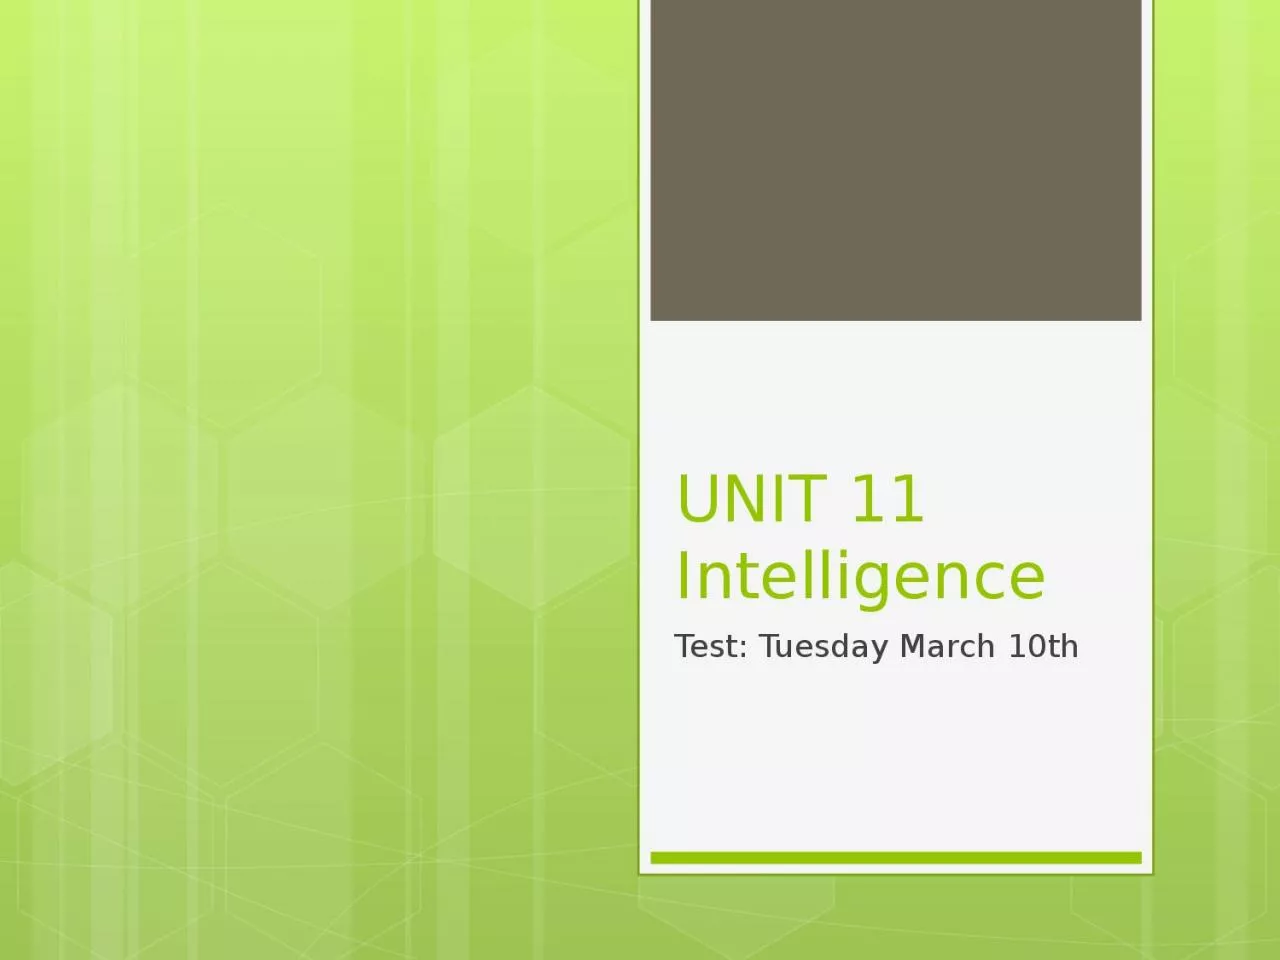 UNIT 11 Intelligence Test: Tuesday March 10th